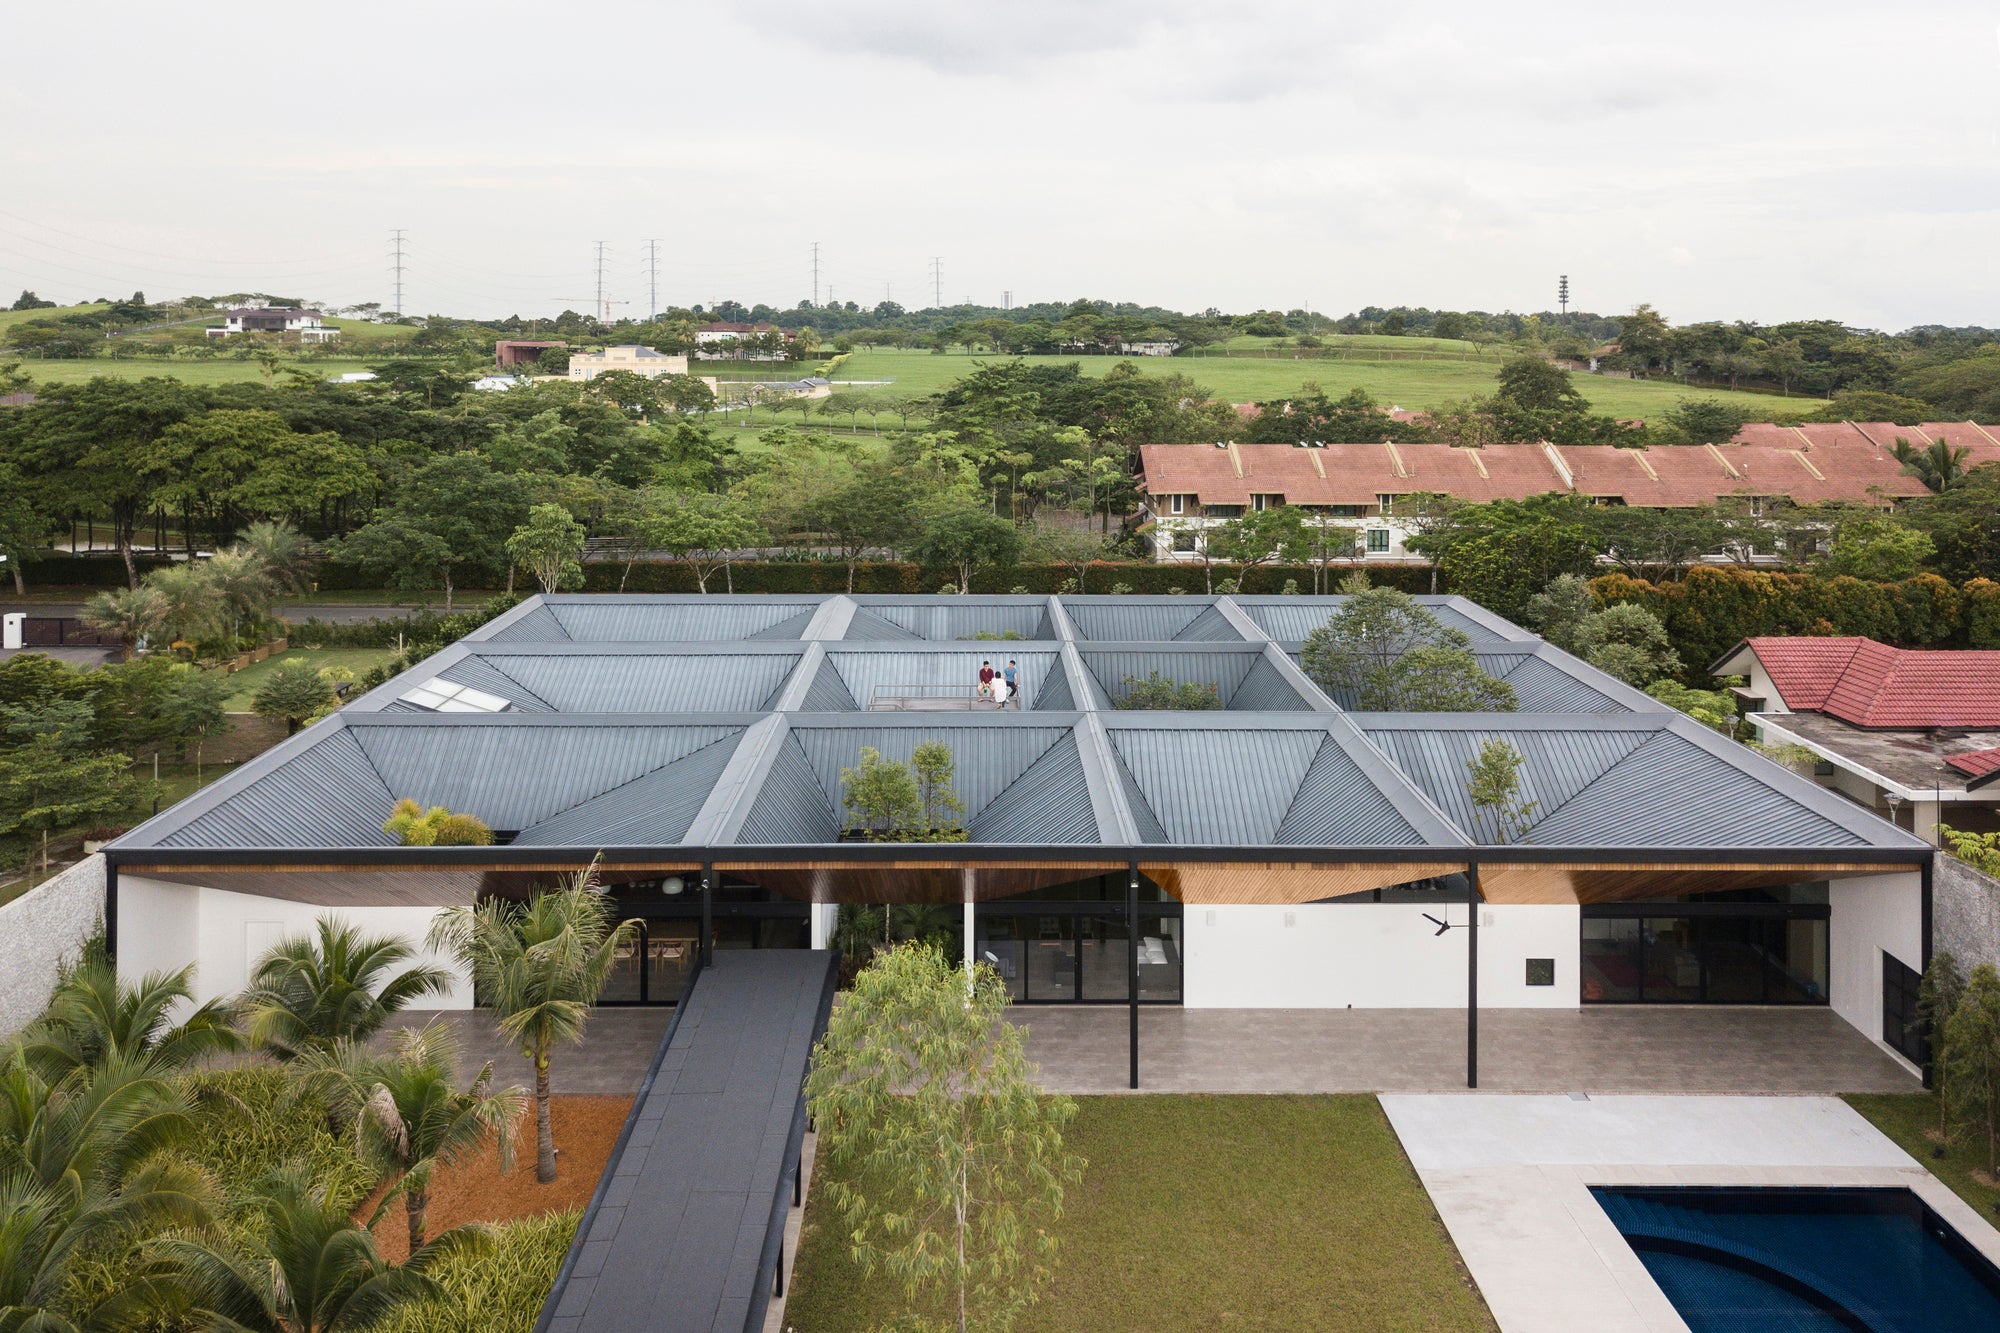 45000 ft² Cloister House Offers Communal Spaces With Privacy